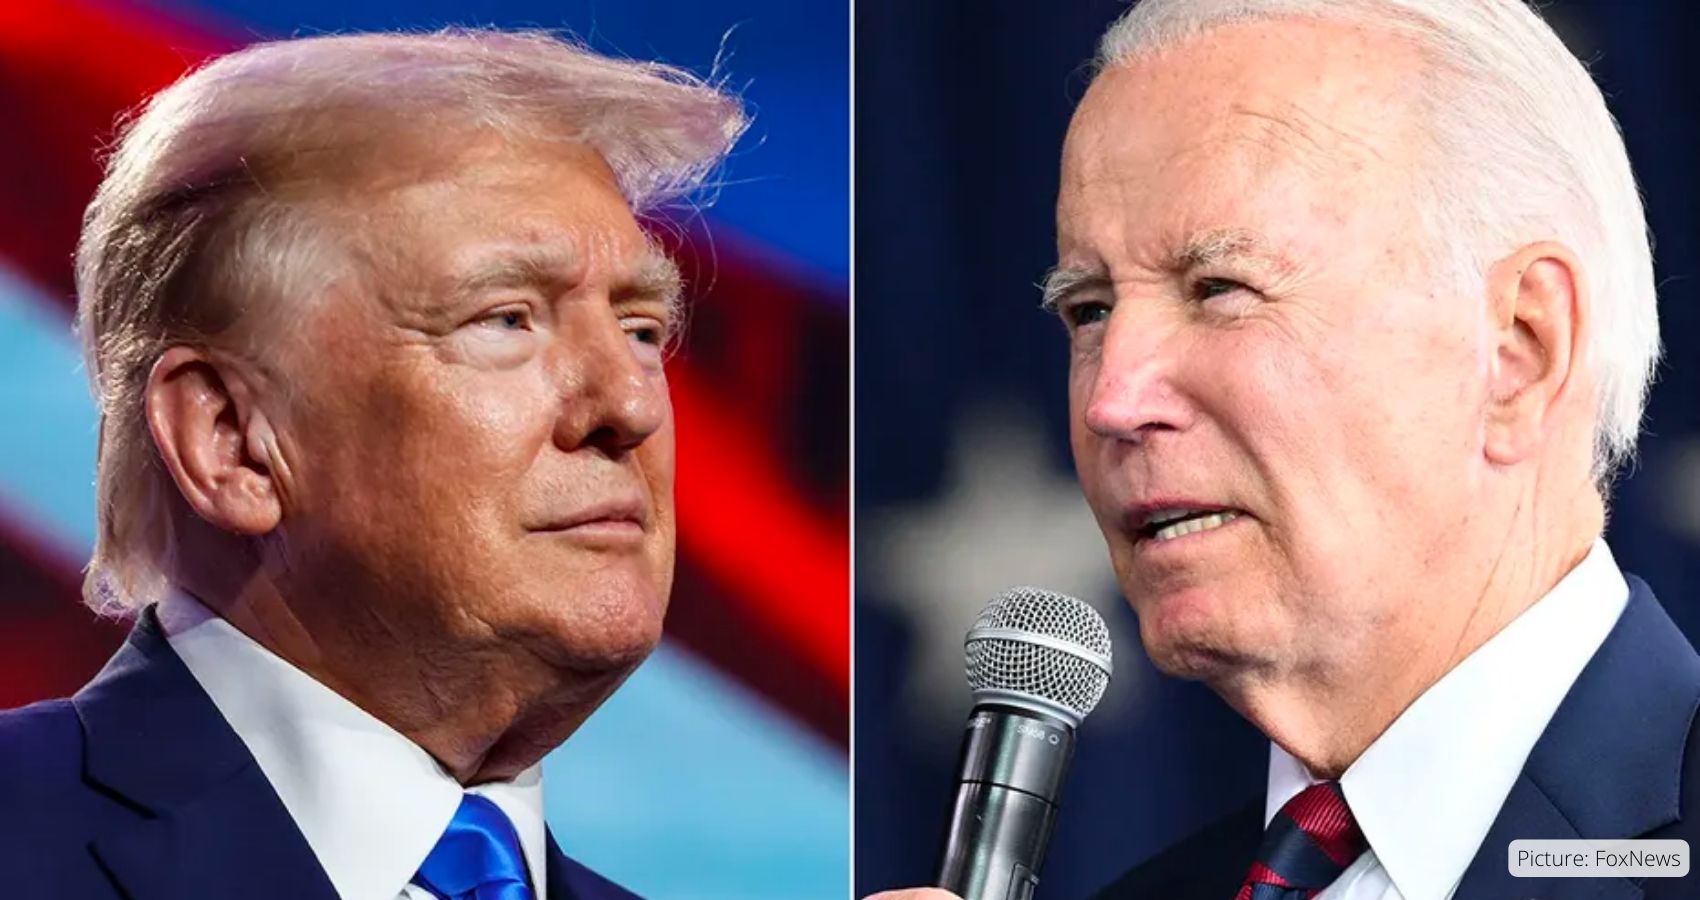 Feature and Cover Biden's Approval Hits Record Low at 34% Amidst Growing Concerns and Trailing Trump in Polls